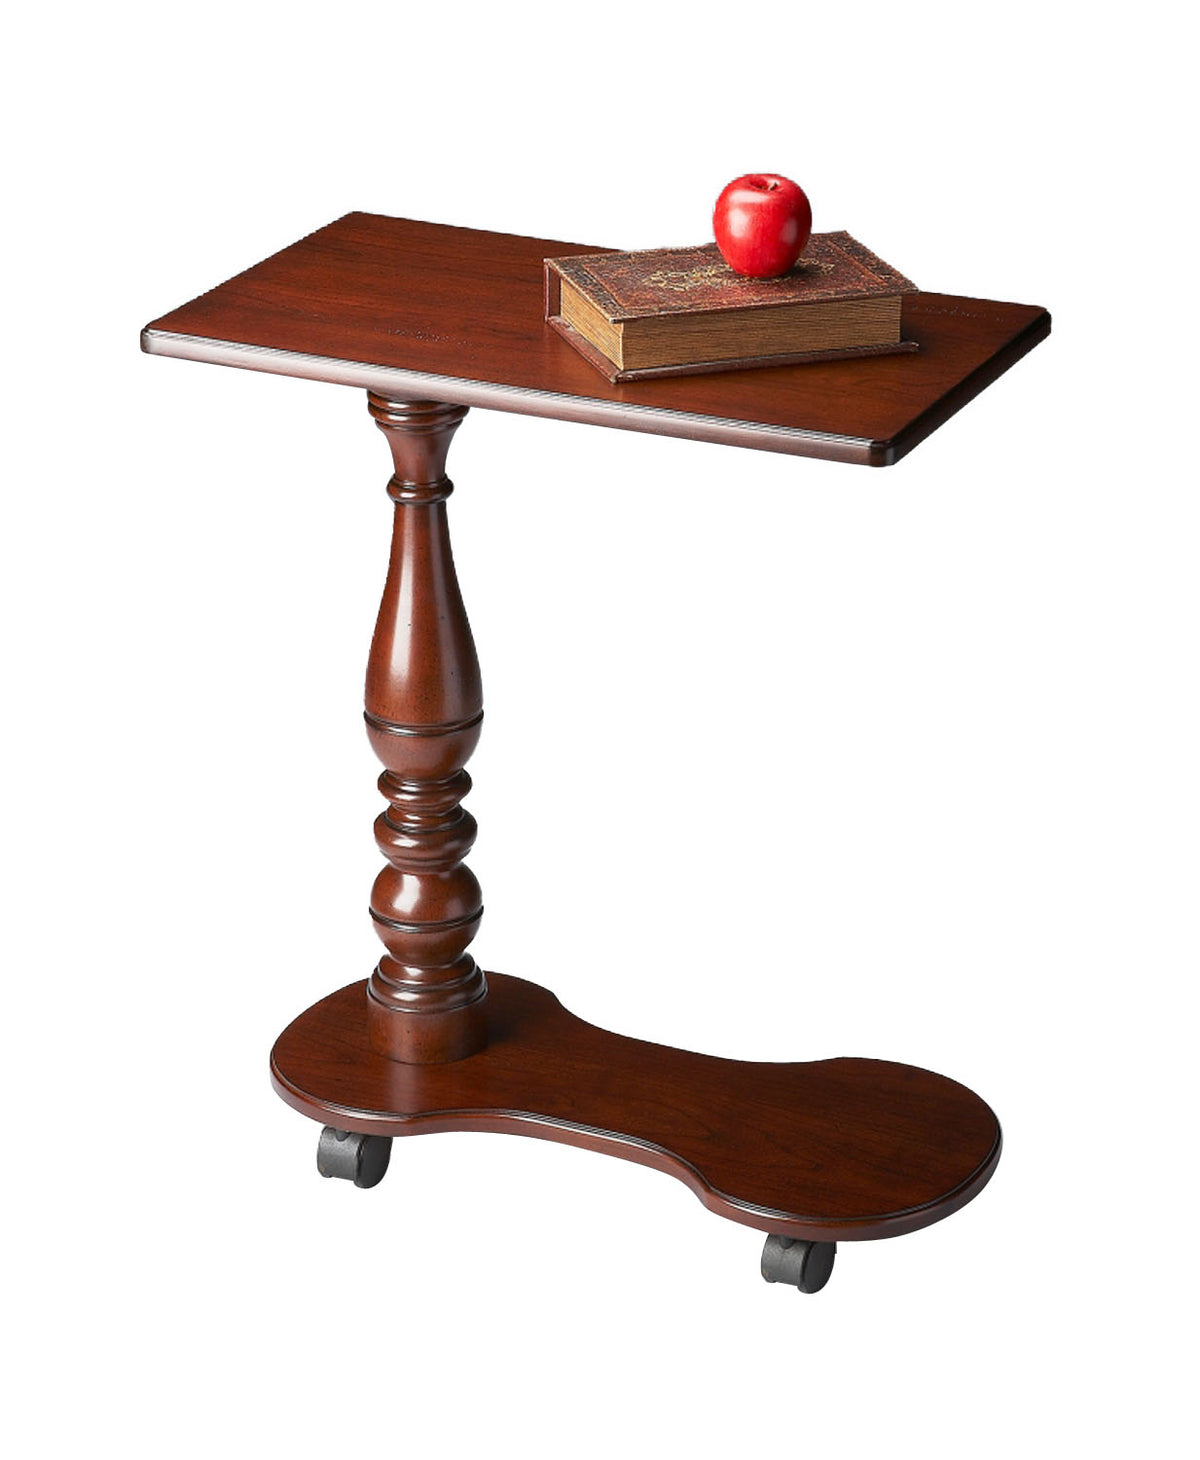 Mobile Tray Table Plantation Cherry Light - YuppyCollections